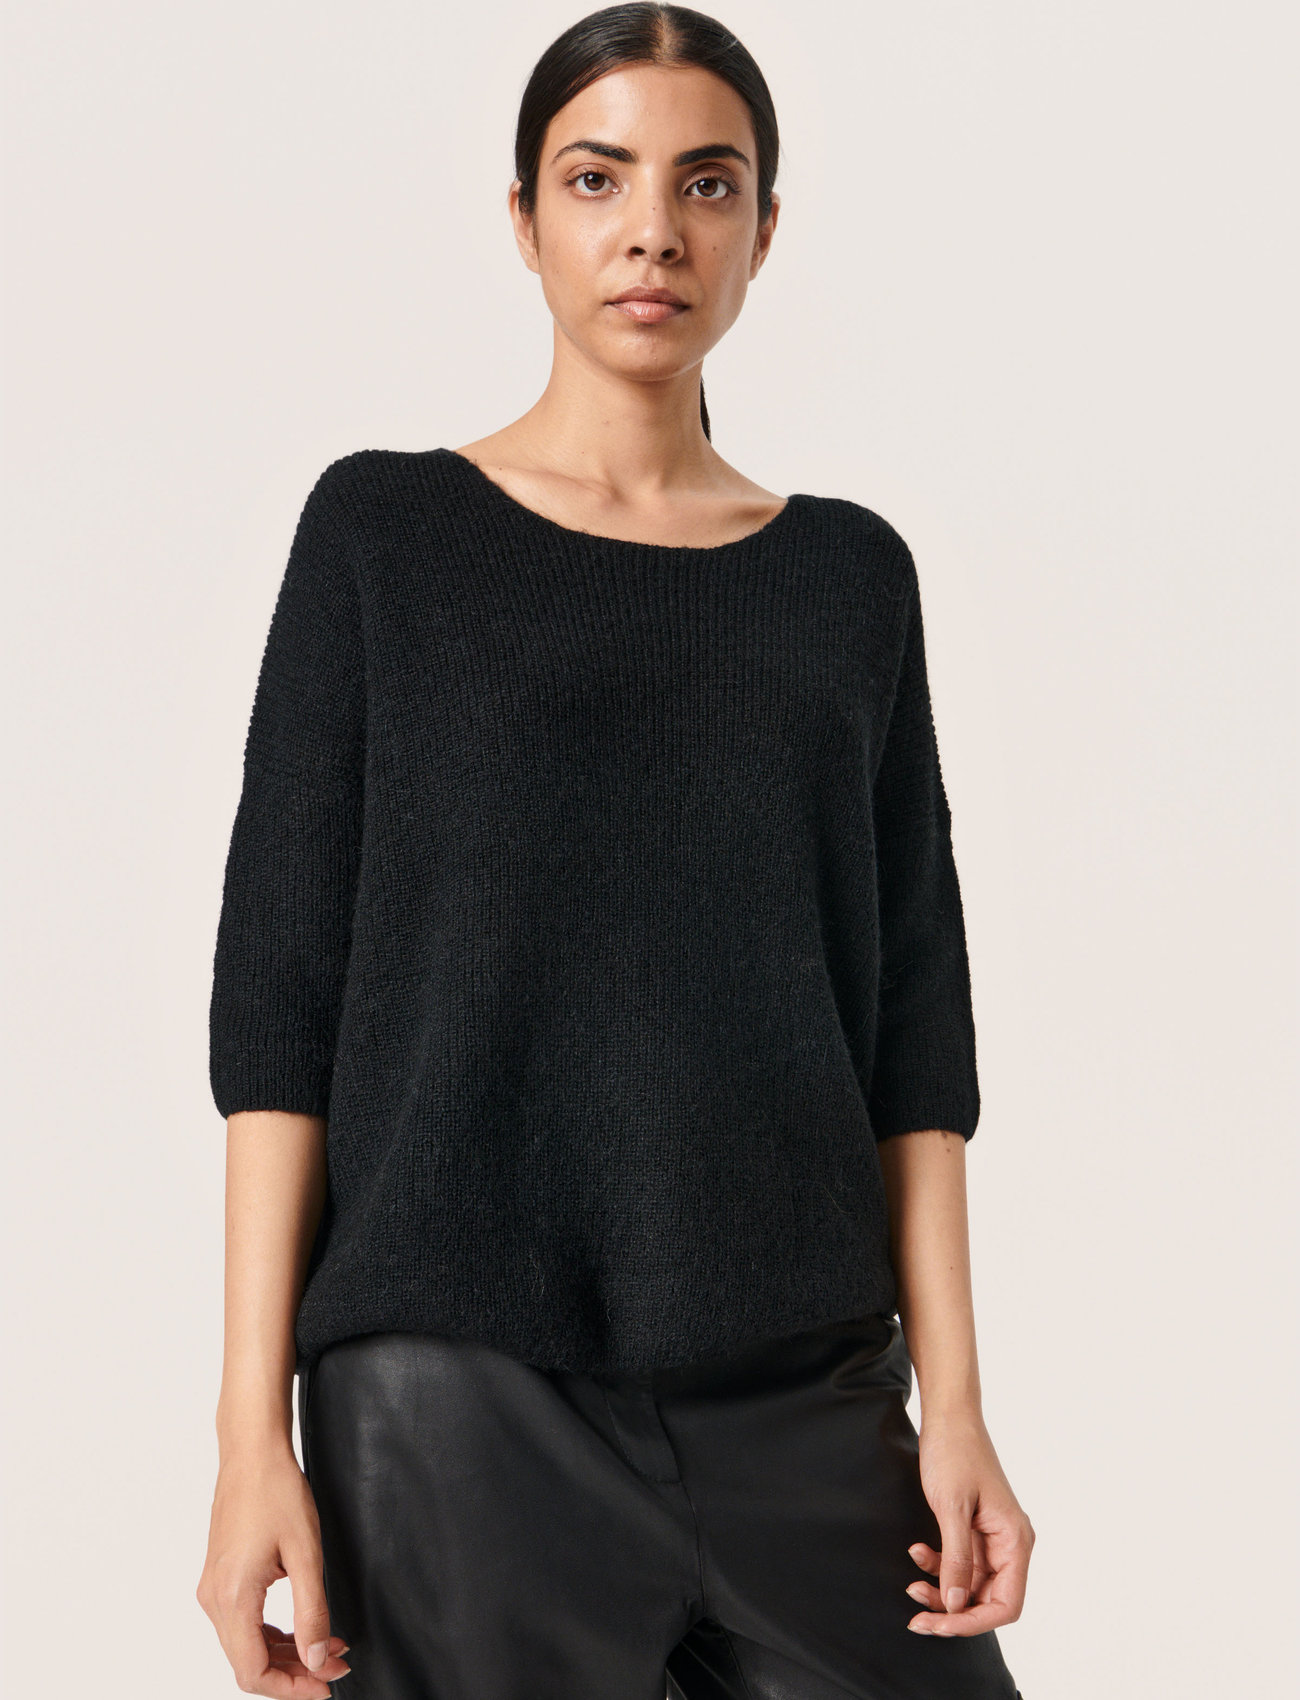 Soaked in Luxury - SLTuesday Jumper - jumpers - black - 0